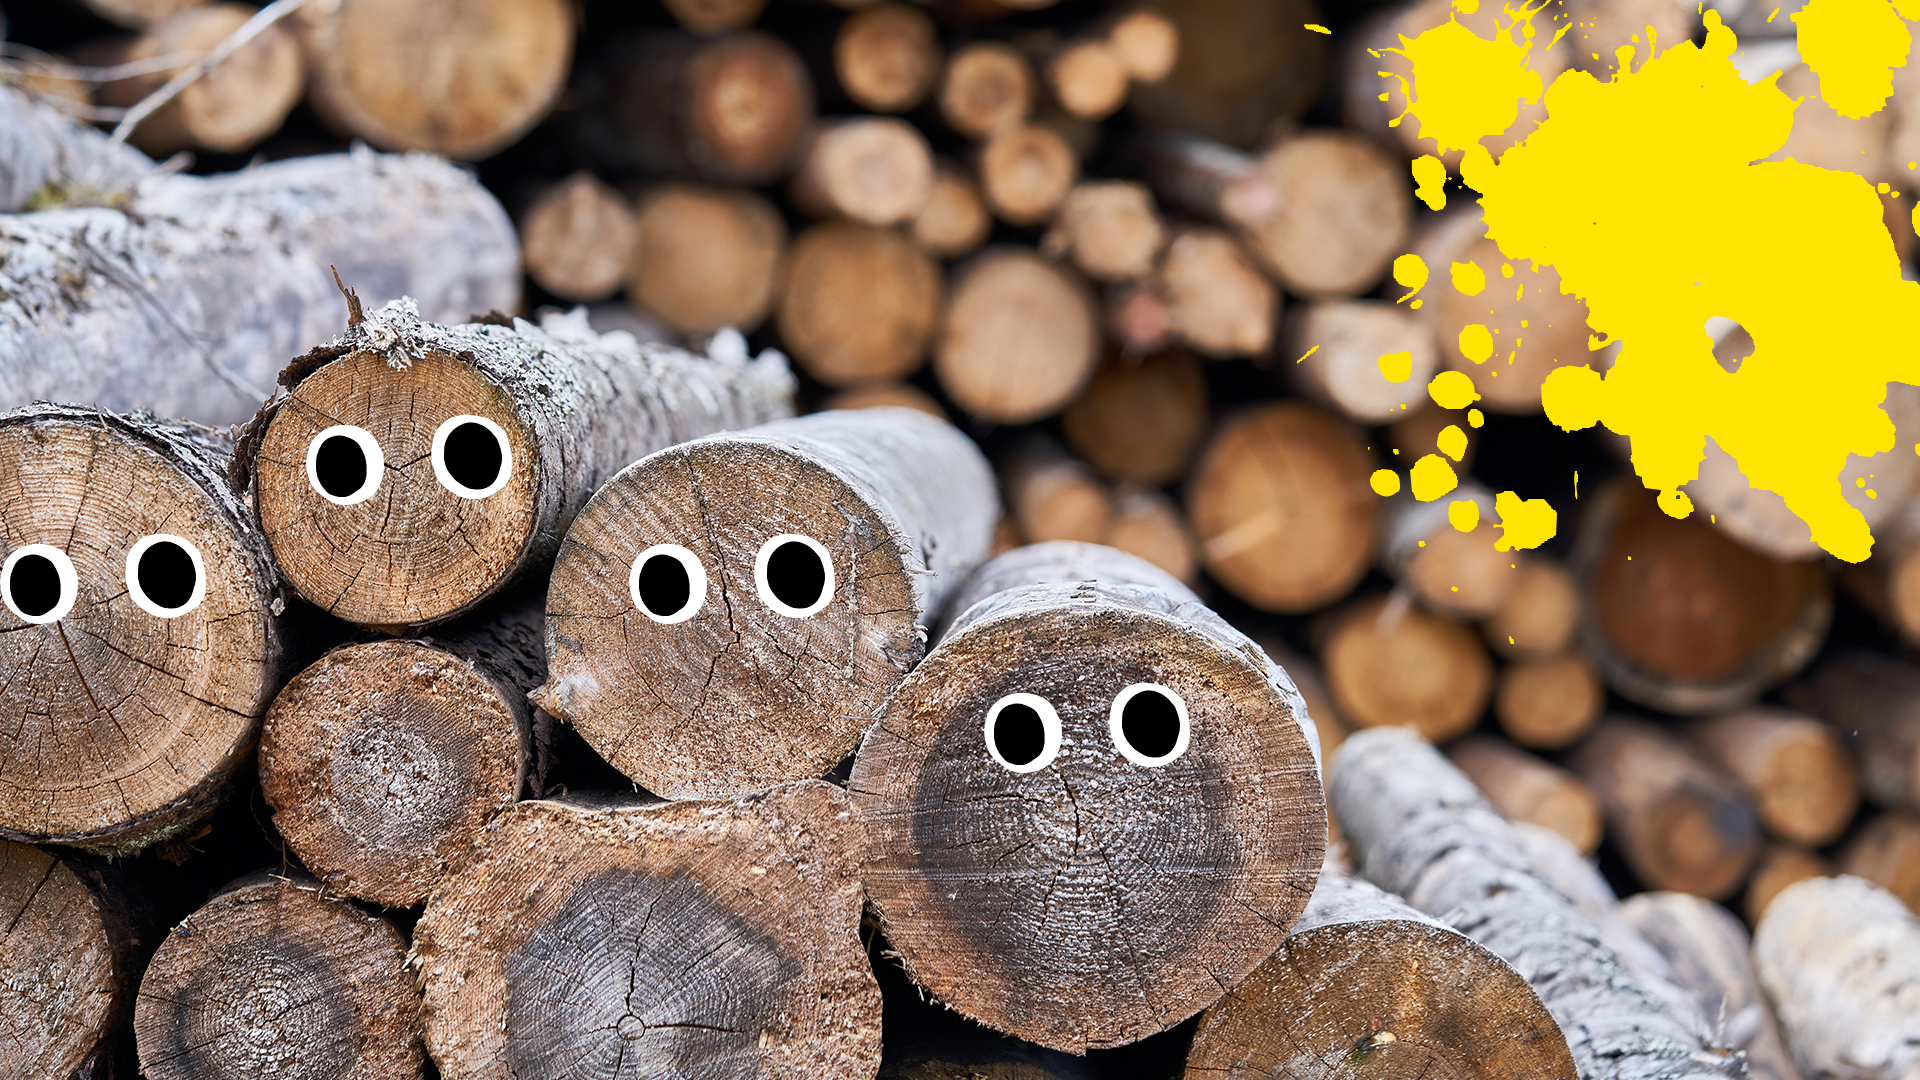 Pile of logs with eyes and yellow splat